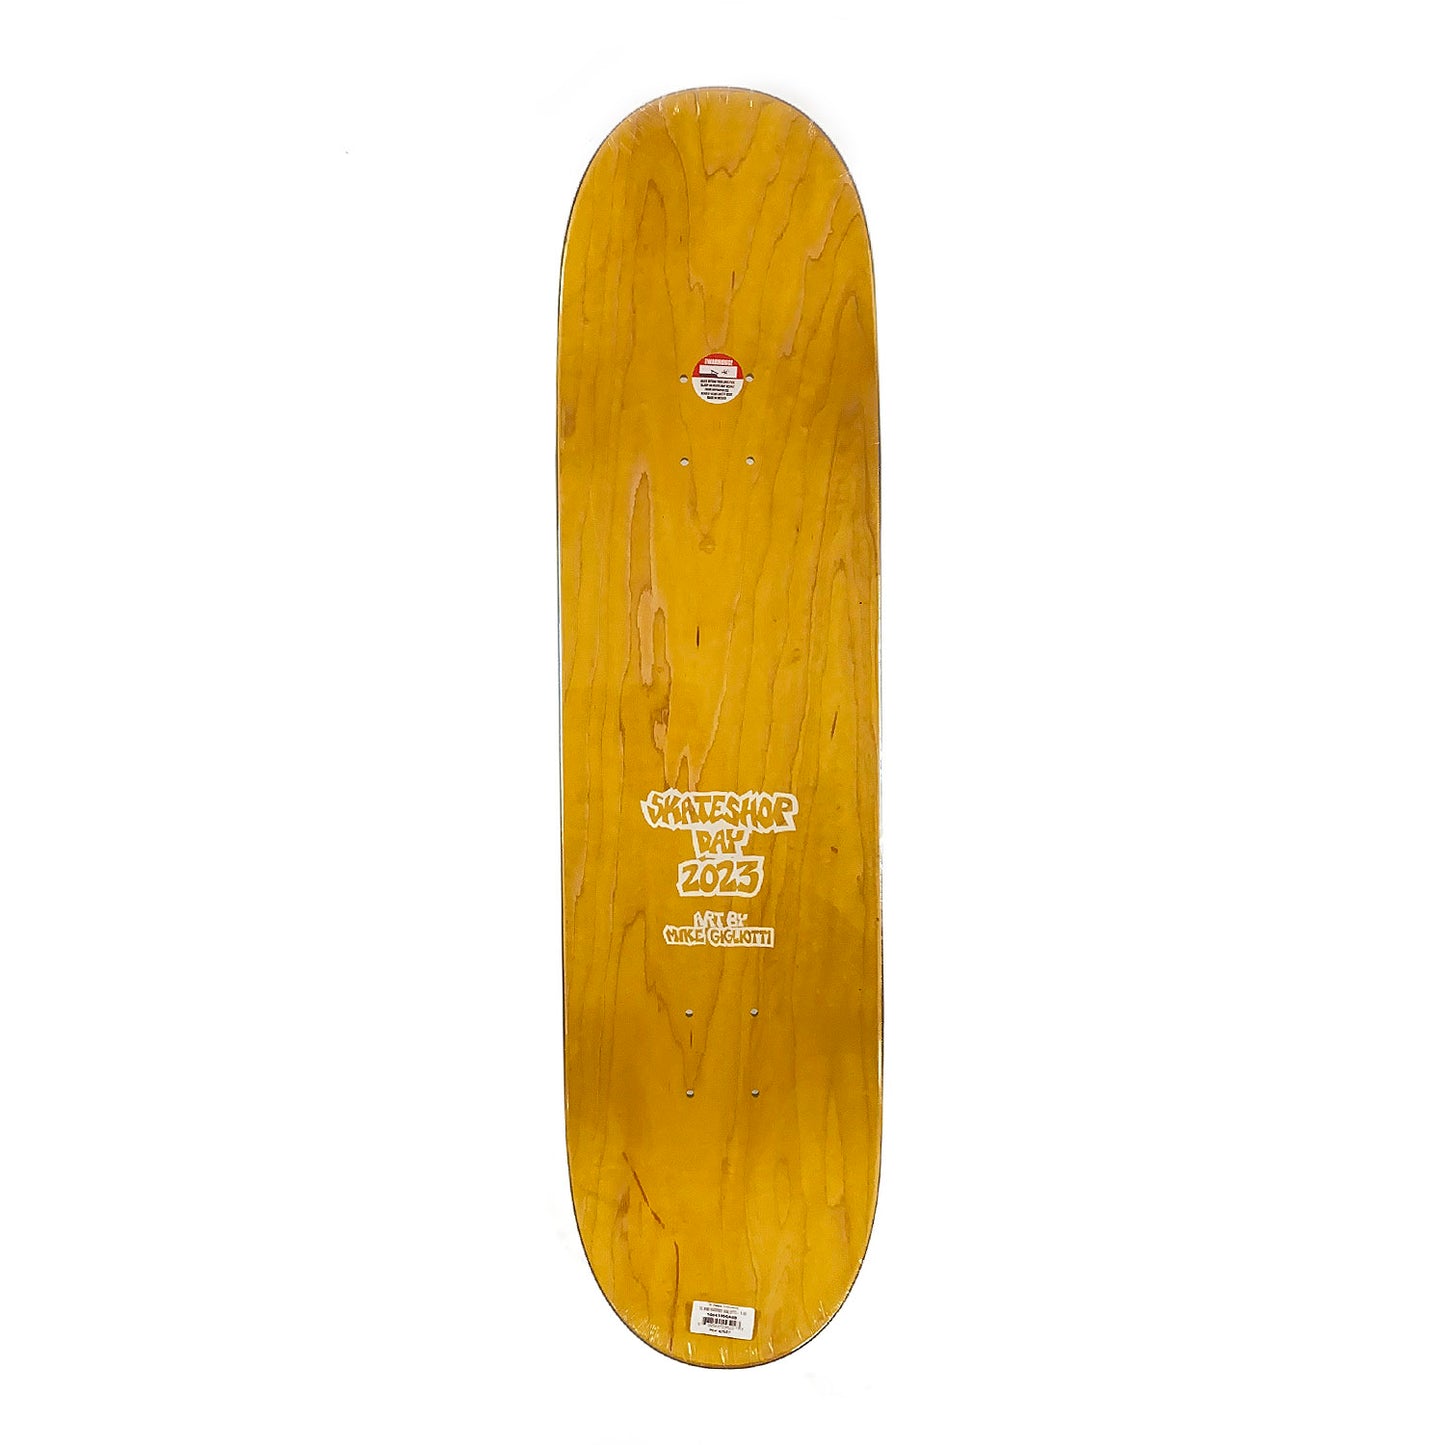 DLX x Skateshop Day 2023 deck by Mike Gigliotti Assorted Veneers - 8.06" - Prime Delux Store